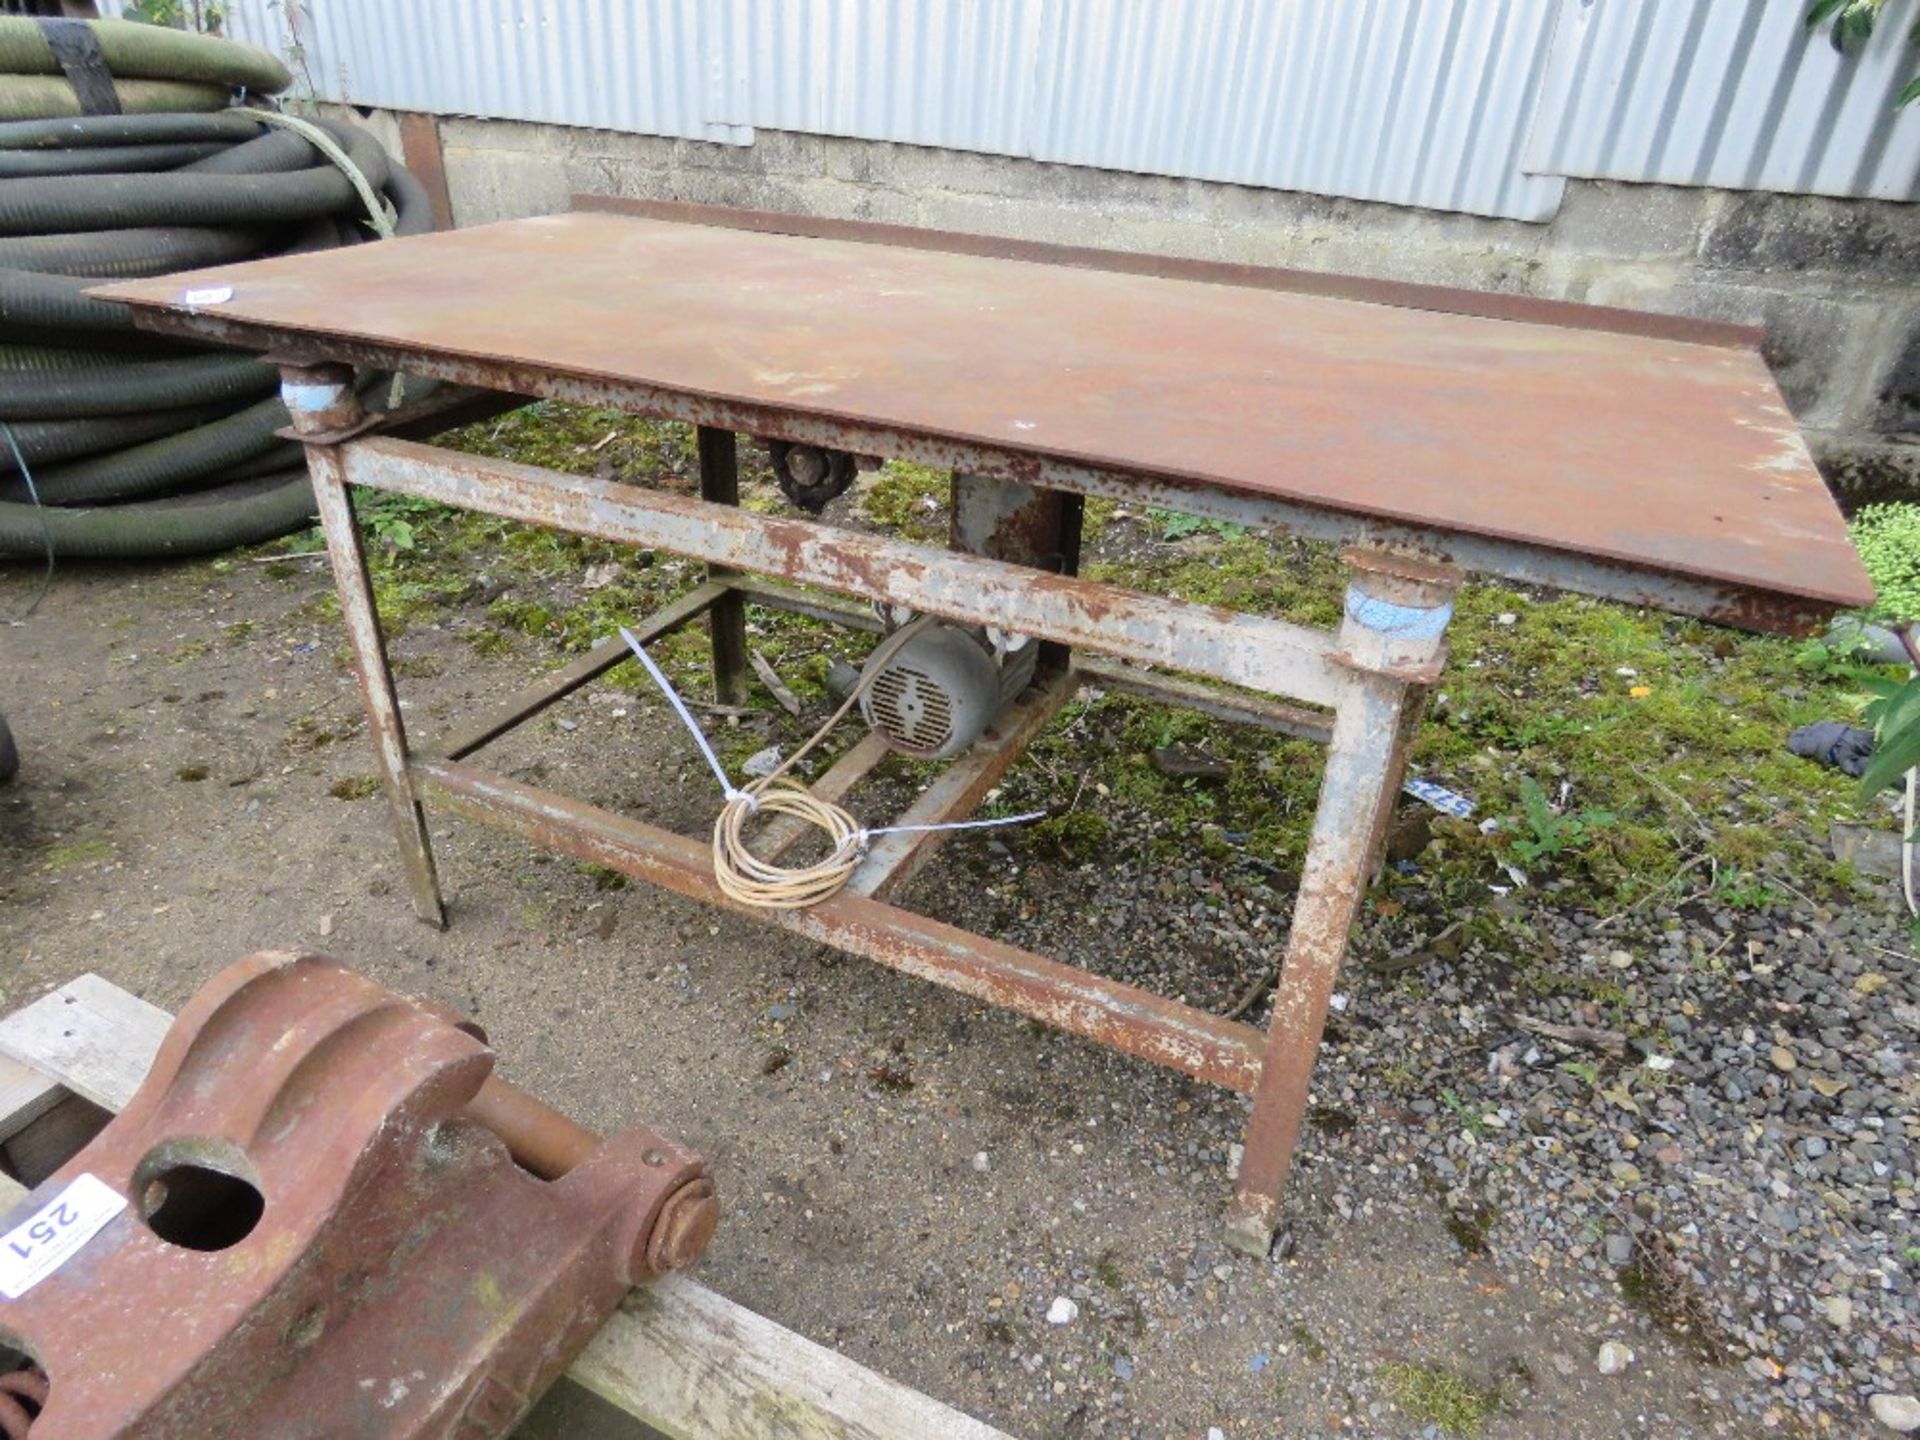 SLAB MAKING VIBRATING TABLE 240VOLT POWERED....THIS LOT IS SOLD UNDER THE AUCTIONEERS MARGIN SCHEME, - Image 2 of 4